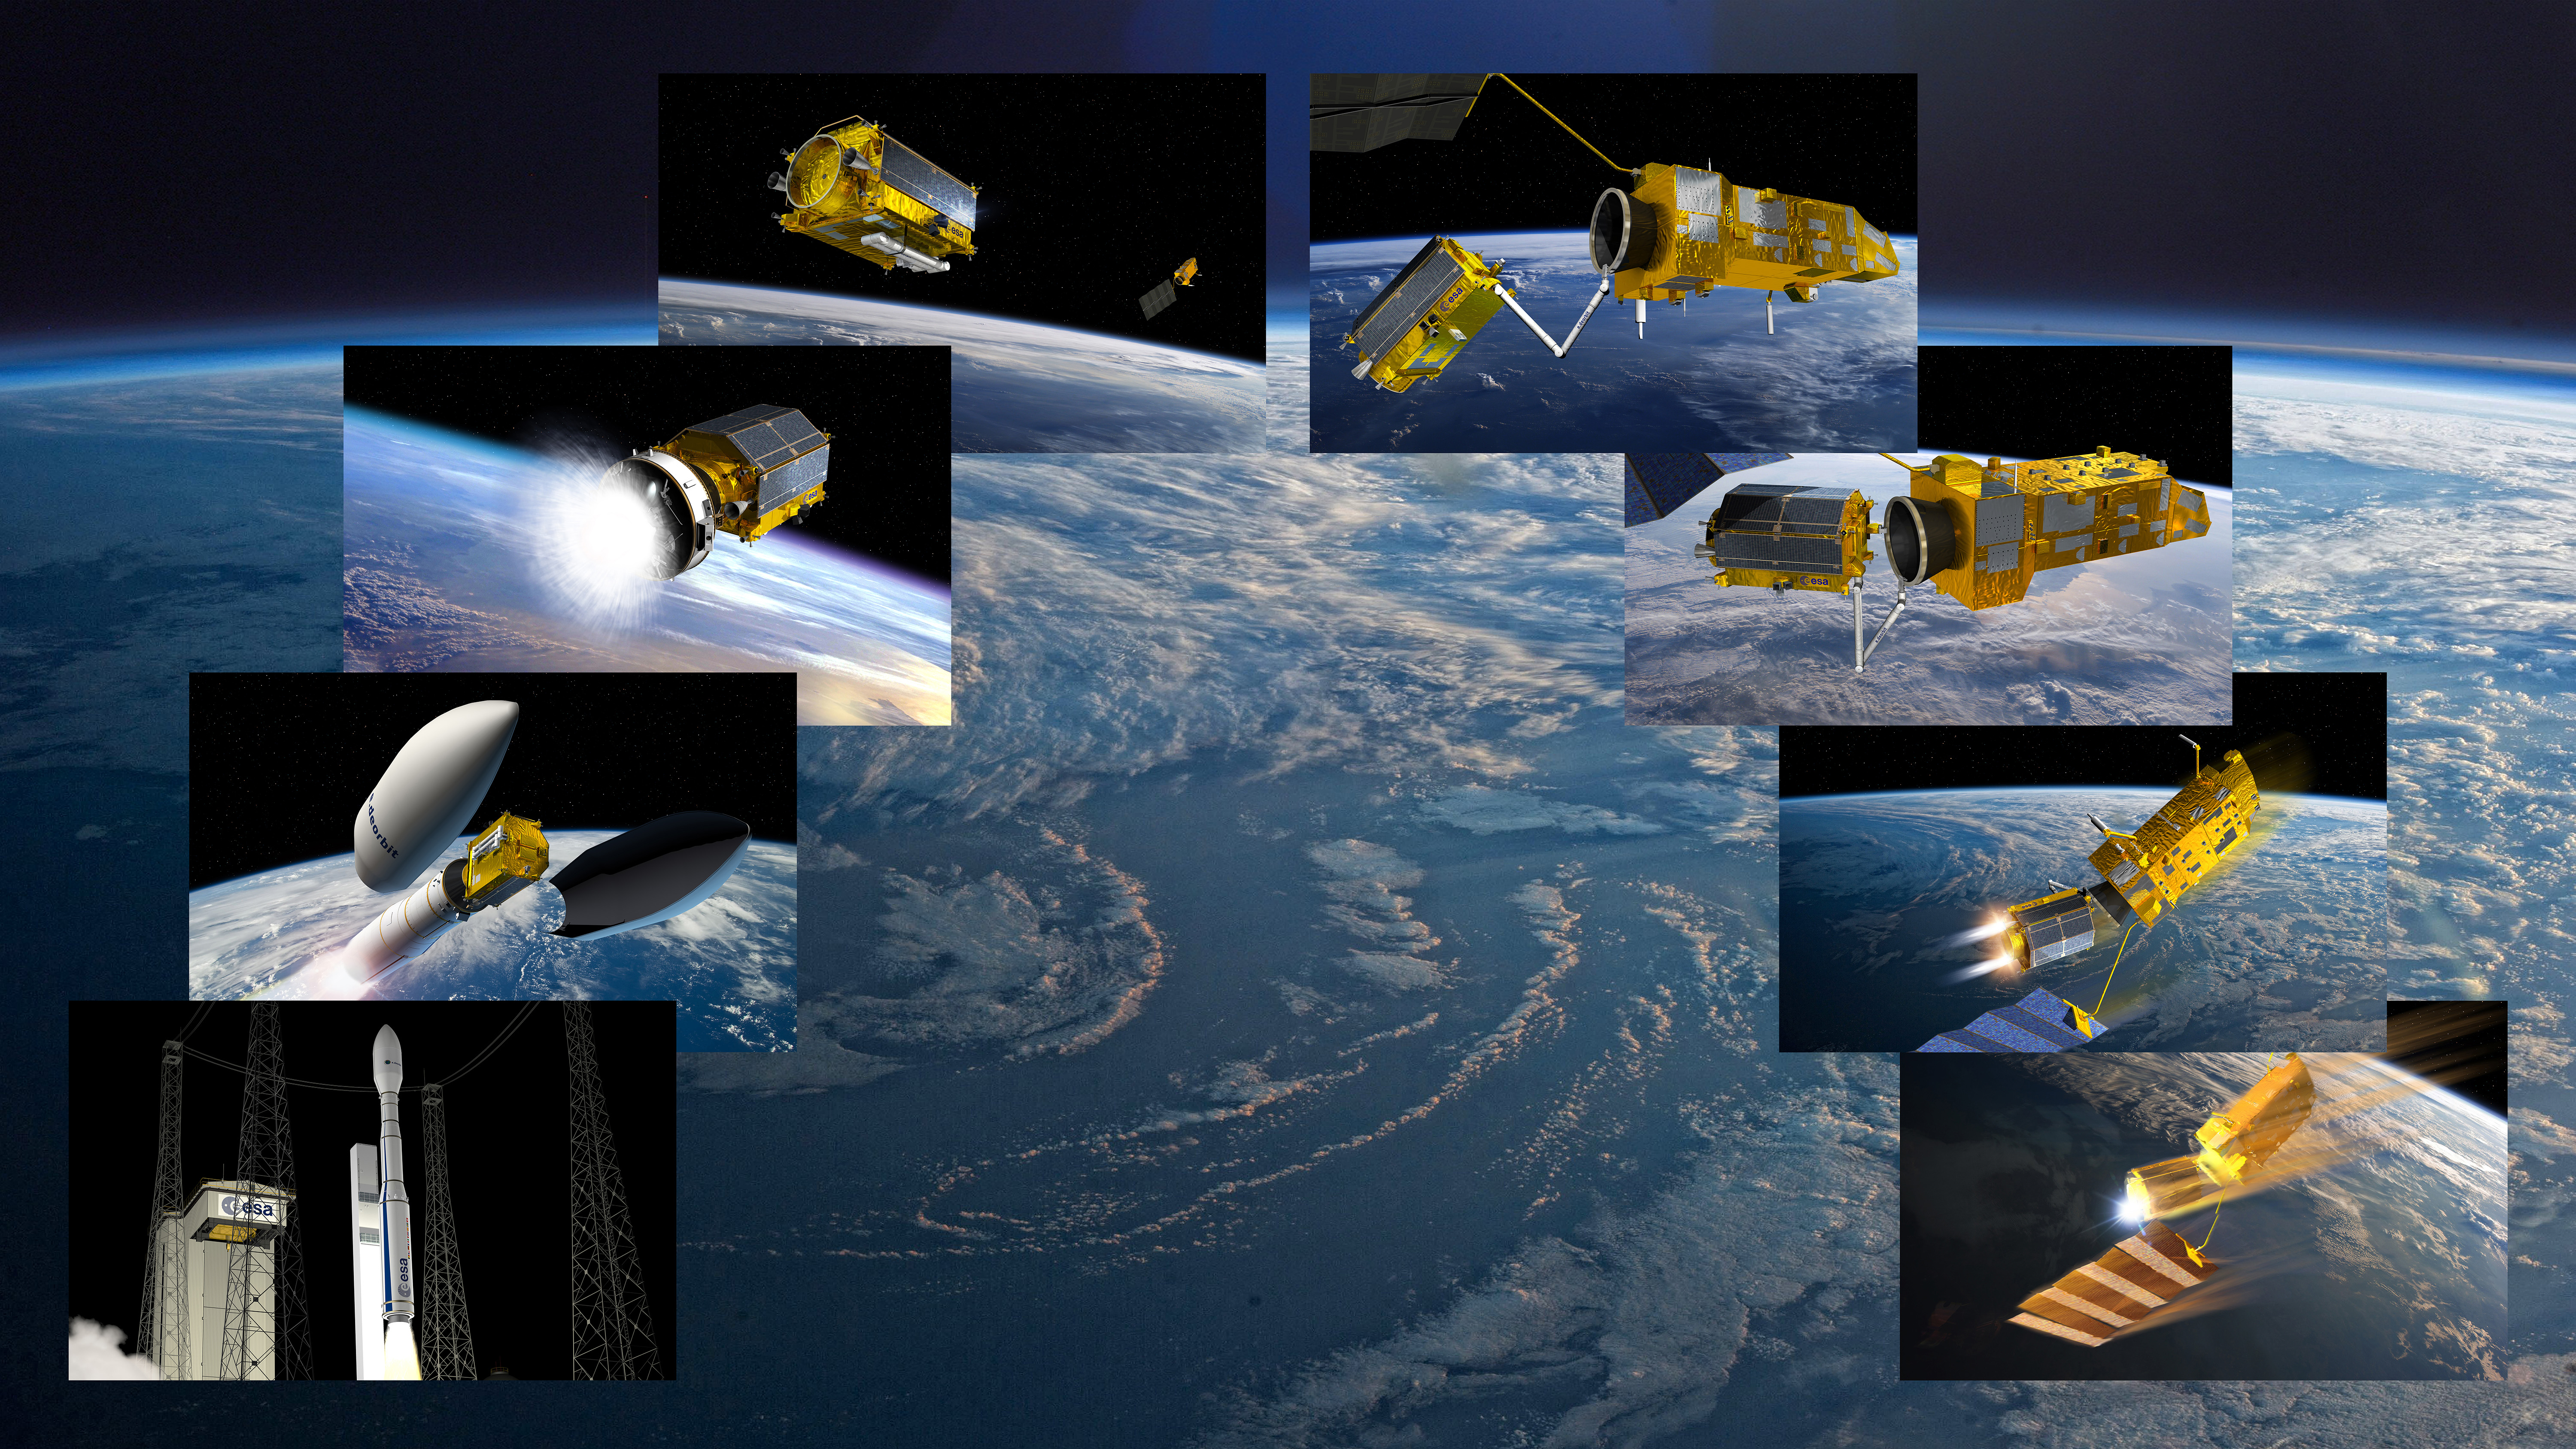 e.Deorbit will be the first-ever active debris removal mission Credits: ESA–David Ducros, Jacky Huart, 2016